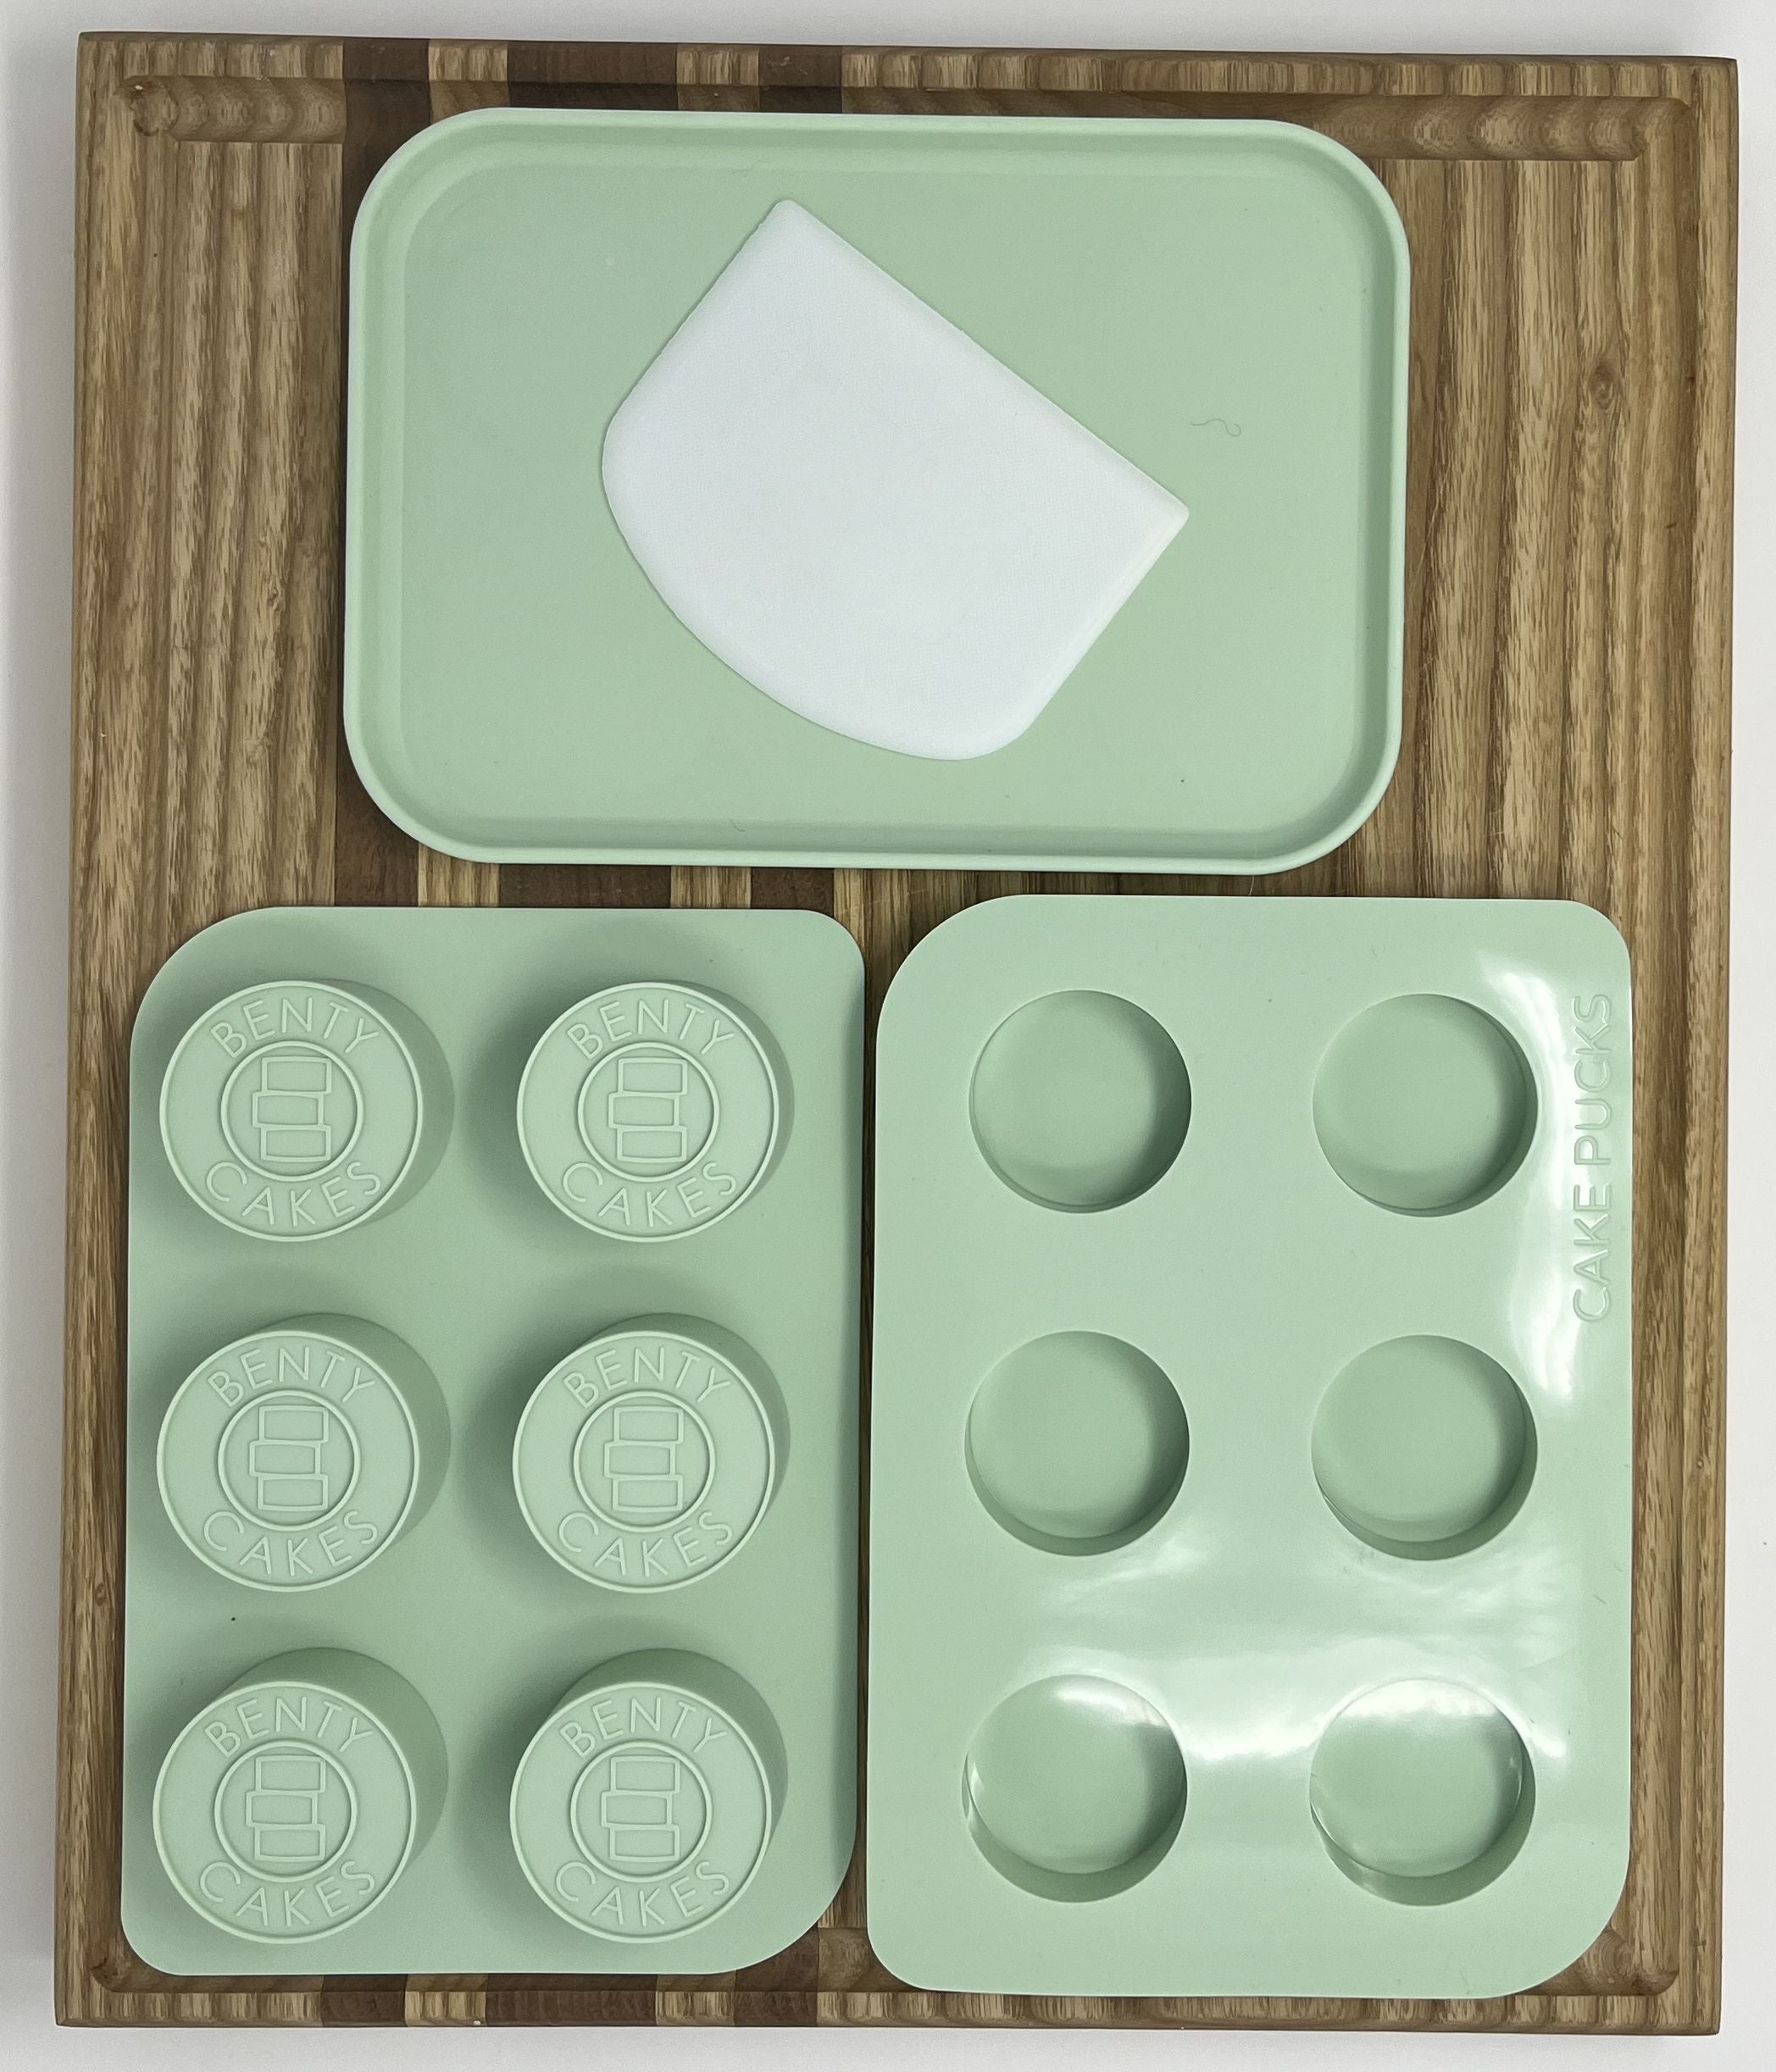 Our new mold set makes it so easy! Cake Pucks are for the